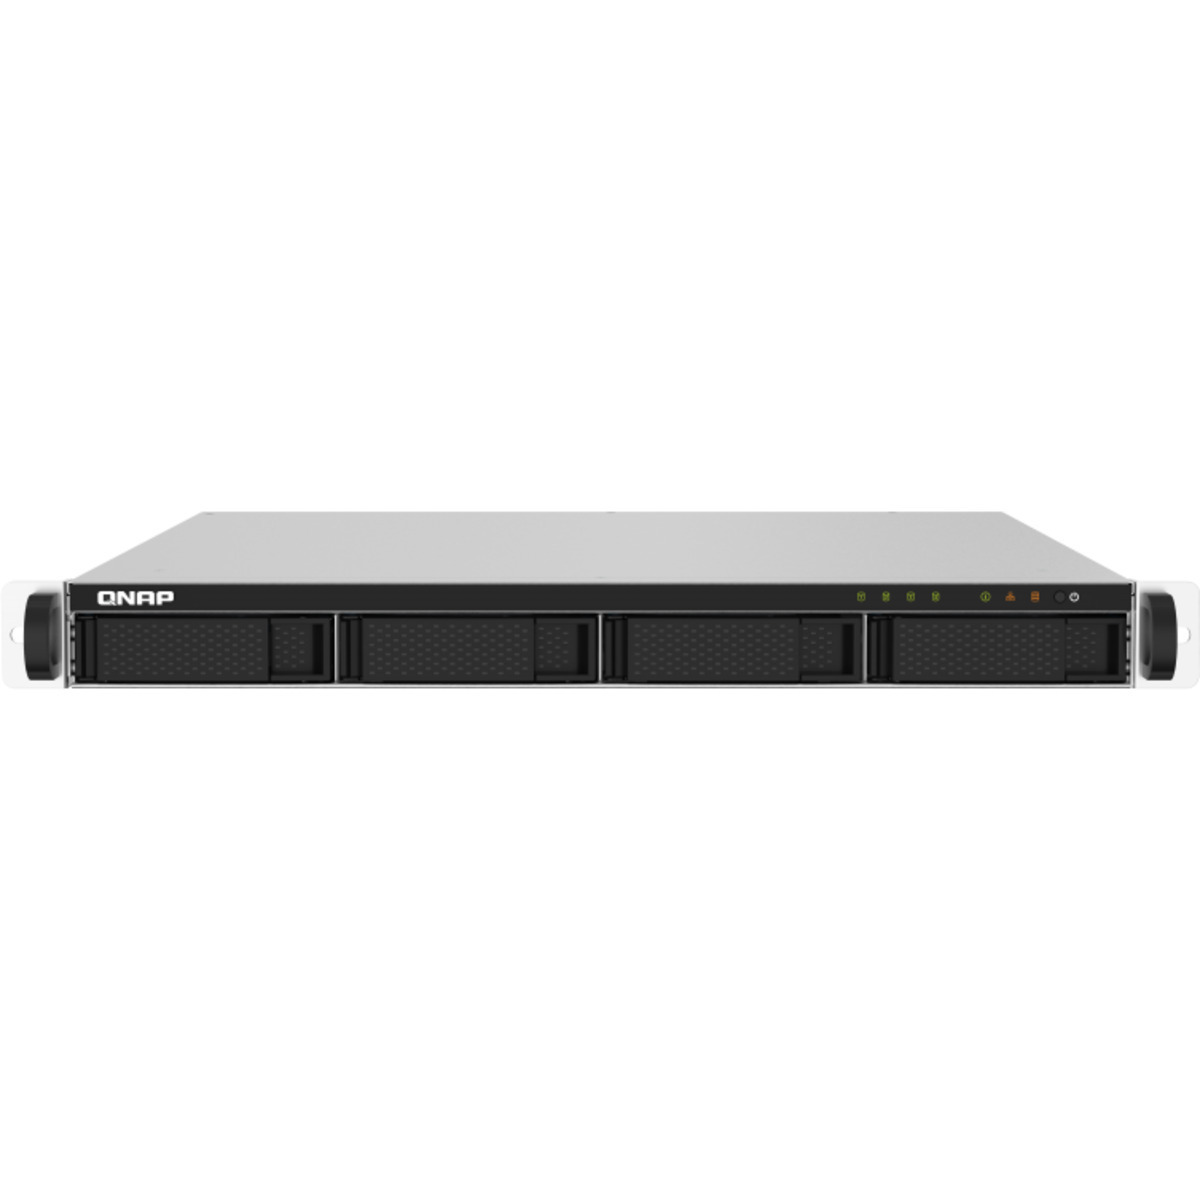 QNAP TS-432PXU 44tb 4-Bay RackMount Personal / Basic Home / Small Office NAS - Network Attached Storage Device 2x22tb Seagate IronWolf Pro ST22000NT001 3.5 7200rpm SATA 6Gb/s HDD NAS Class Drives Installed - Burn-In Tested - FREE RAM UPGRADE TS-432PXU